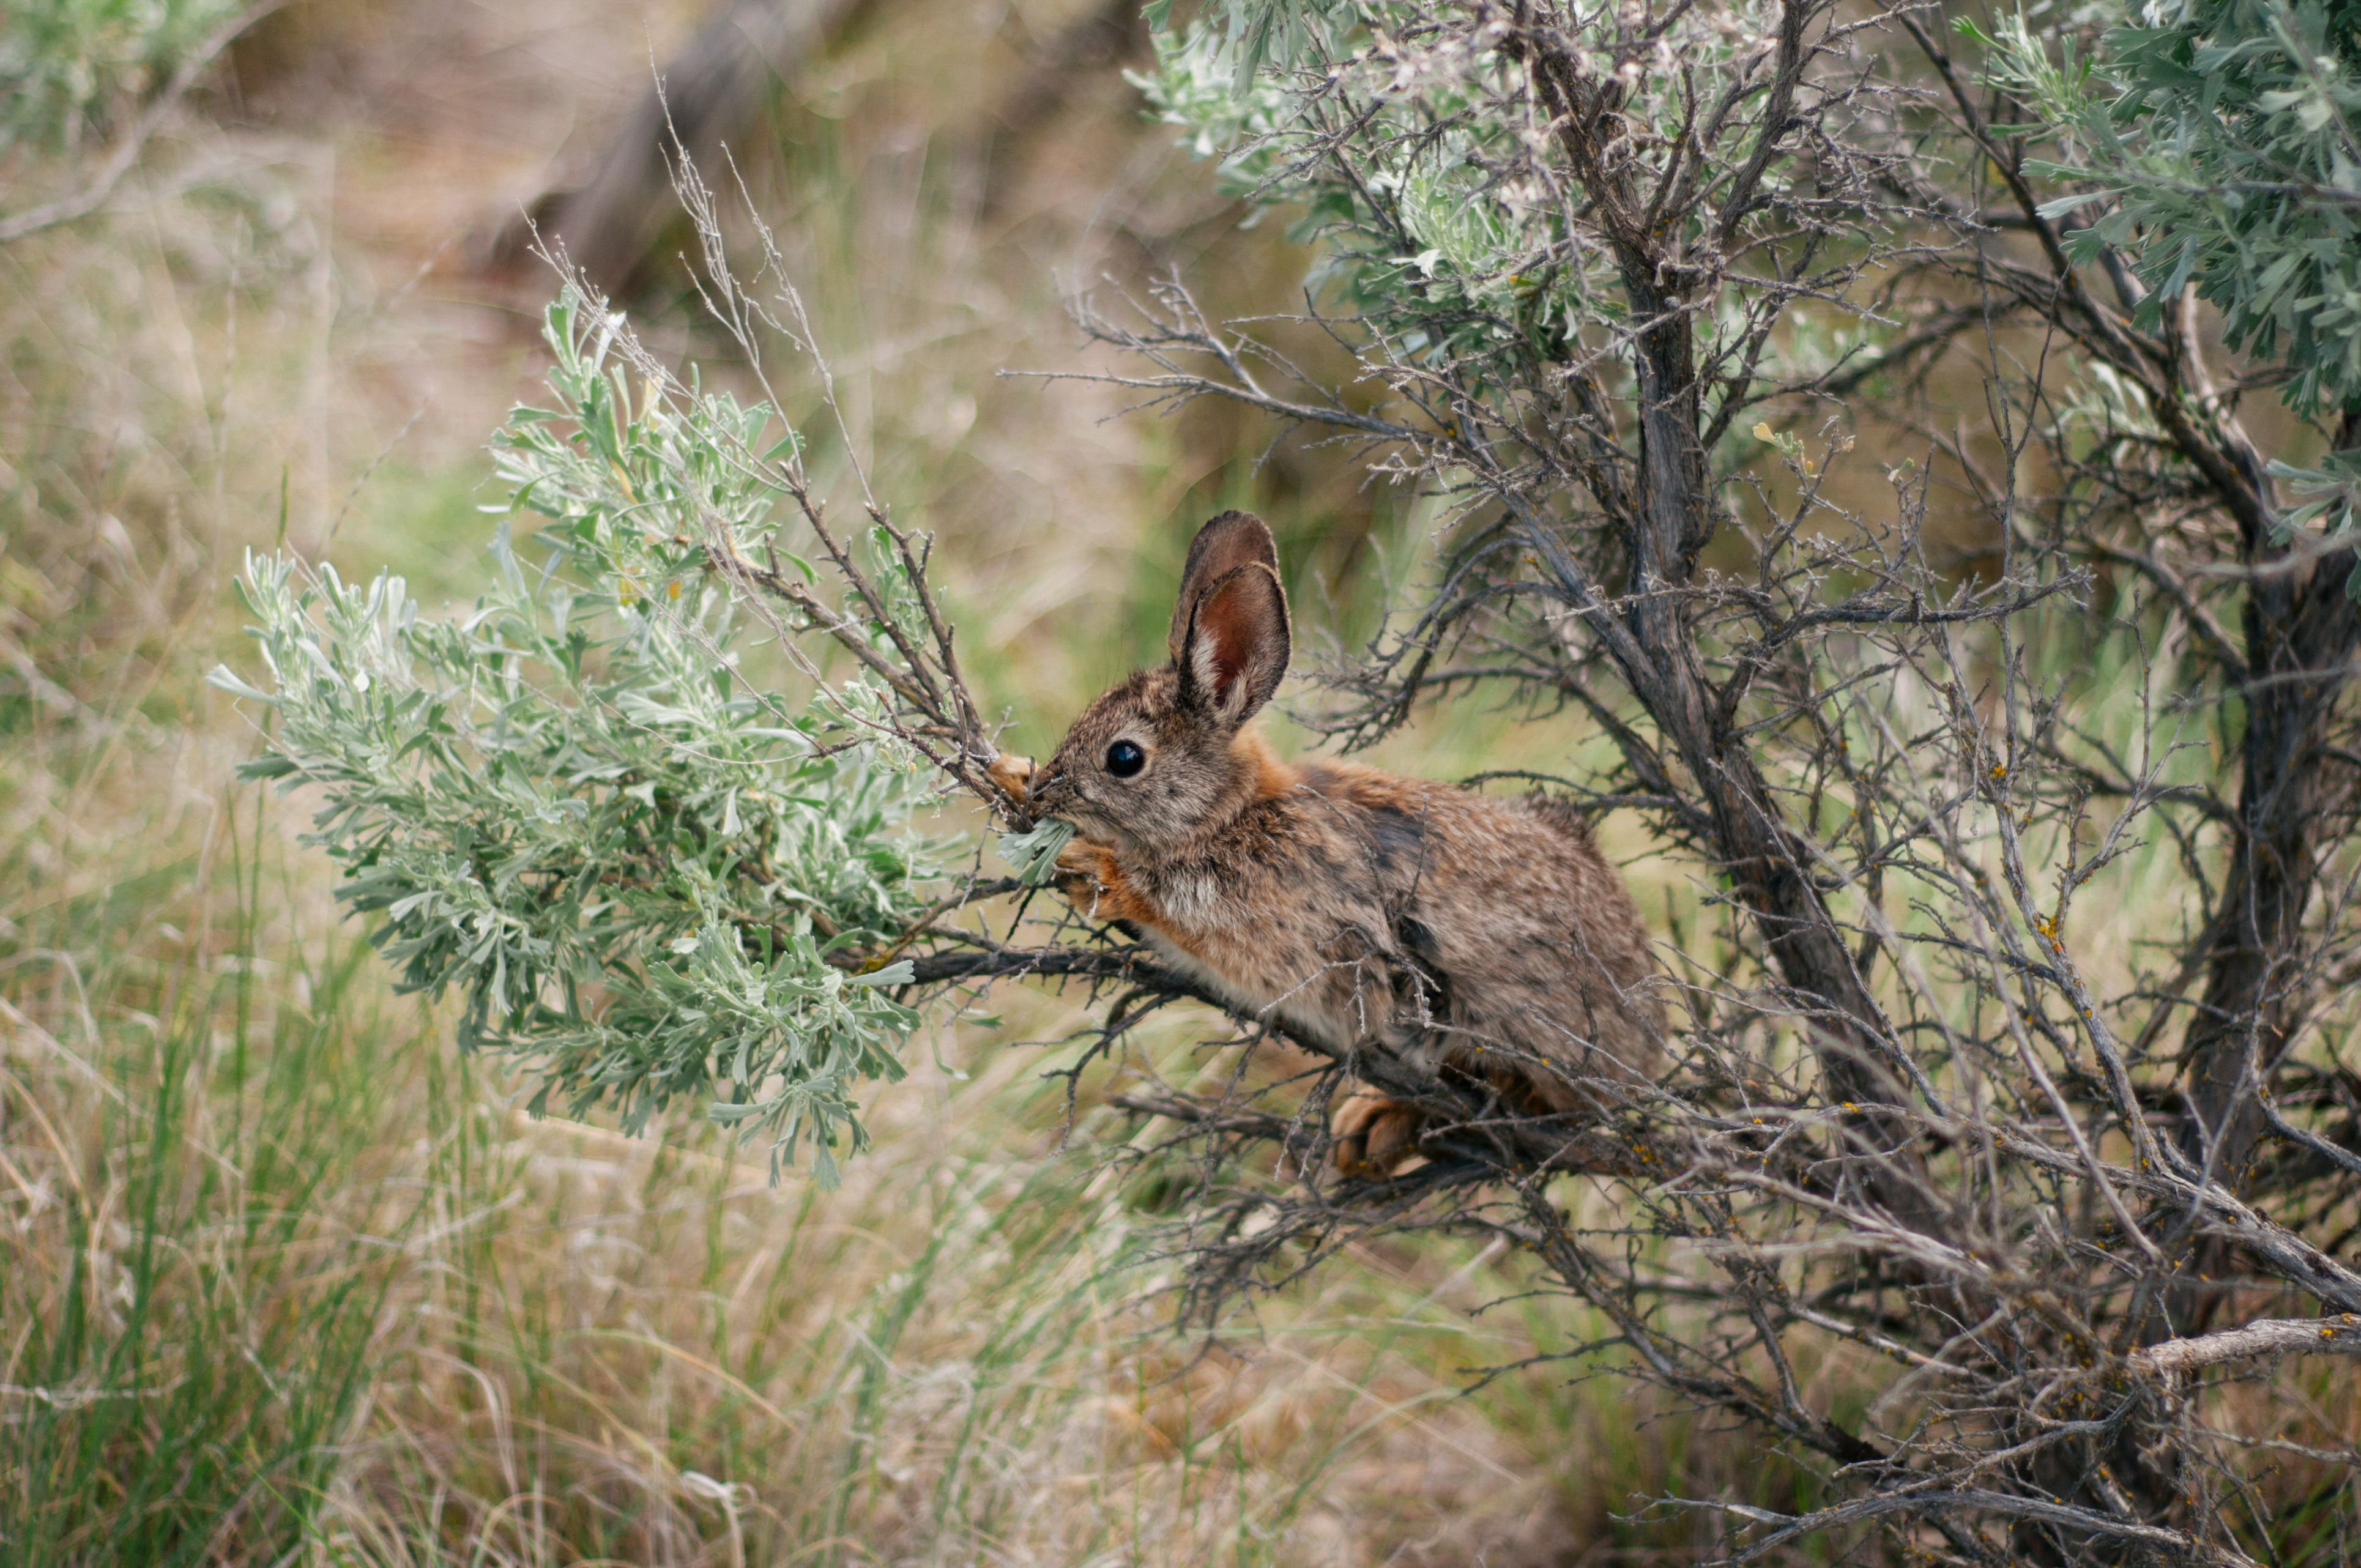 Pygmy rabbits – the smallest rabbit in North America – are endangered in Washington. After a devastating fire season in 2020, biologists have found new burrows that give them hope for the species.